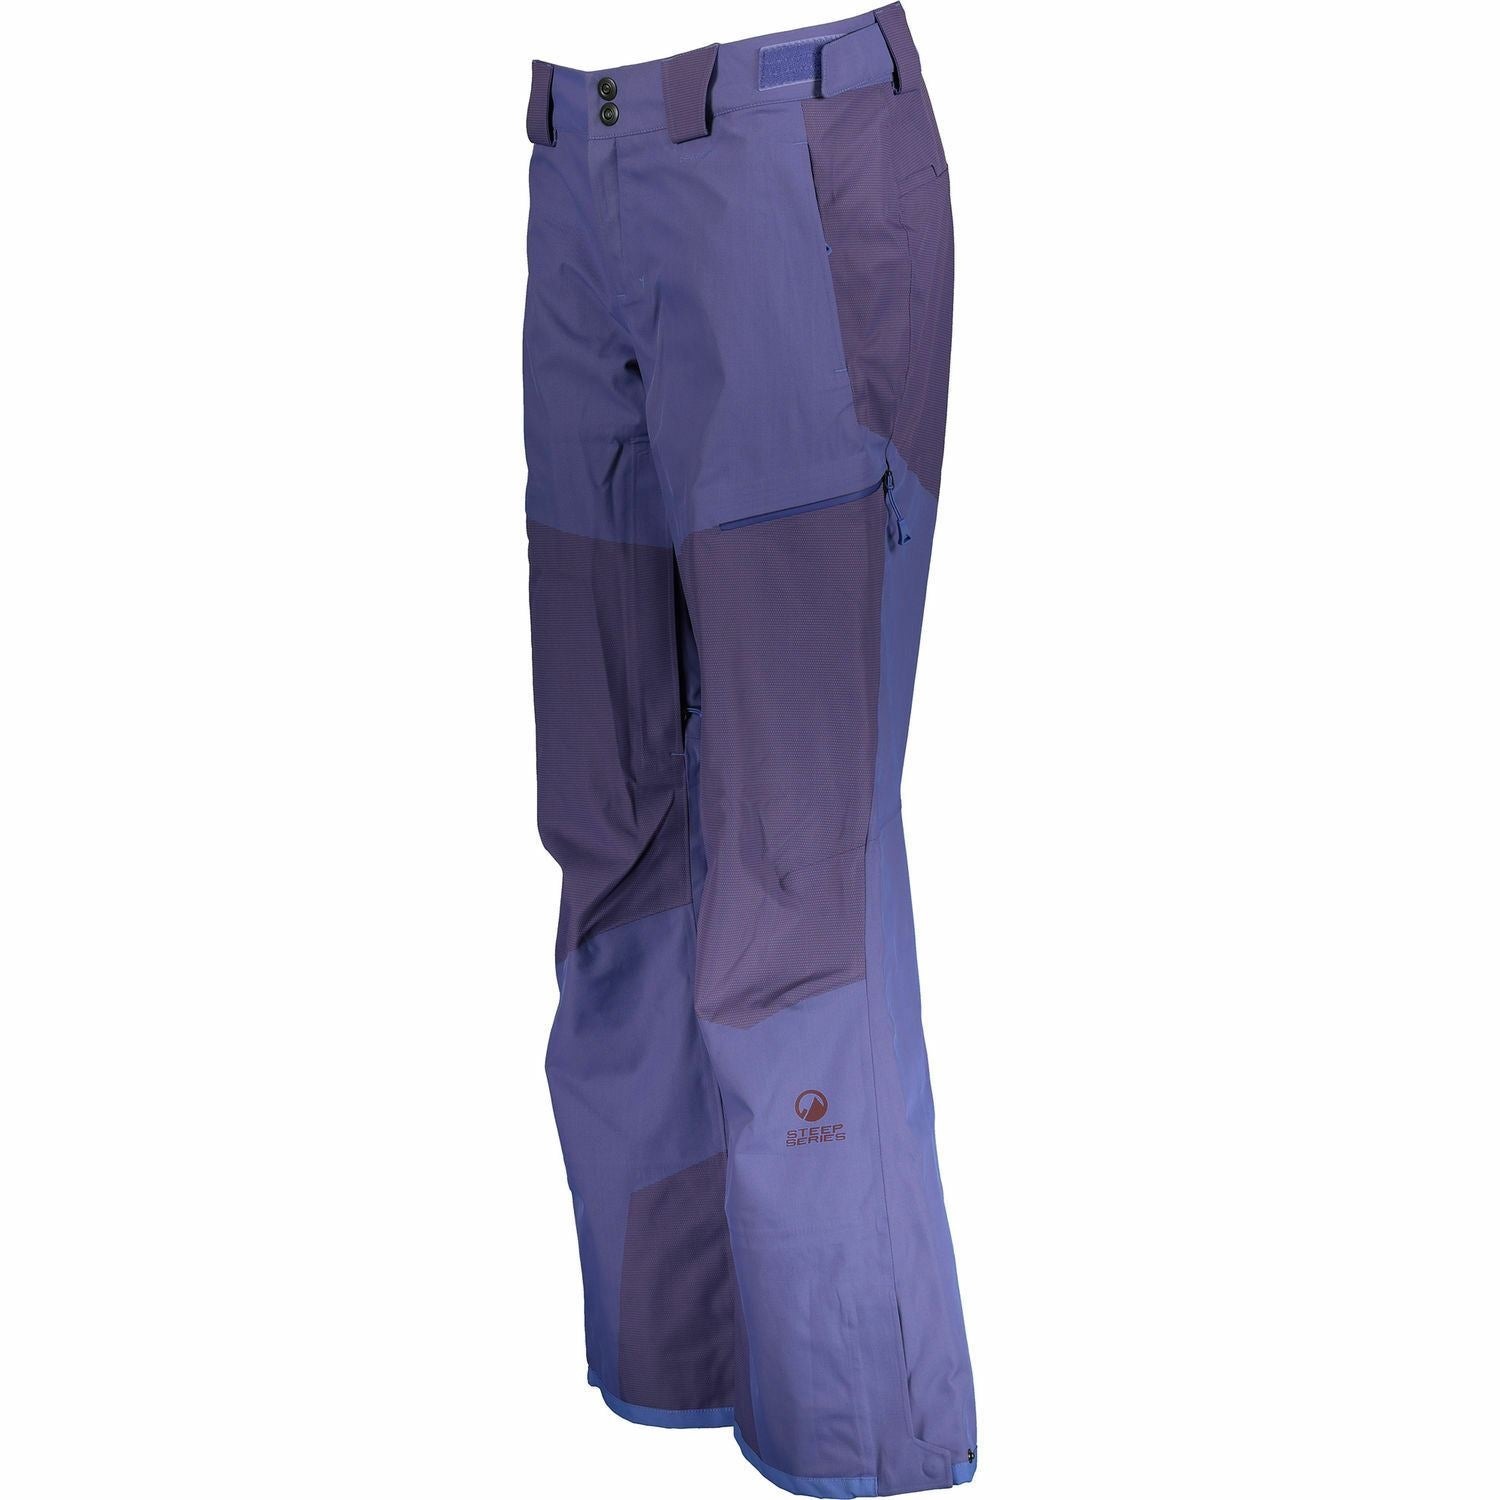 THE NORTH FACE Women's Fuseform Brigandine 3L Trousers Regular size S & size M